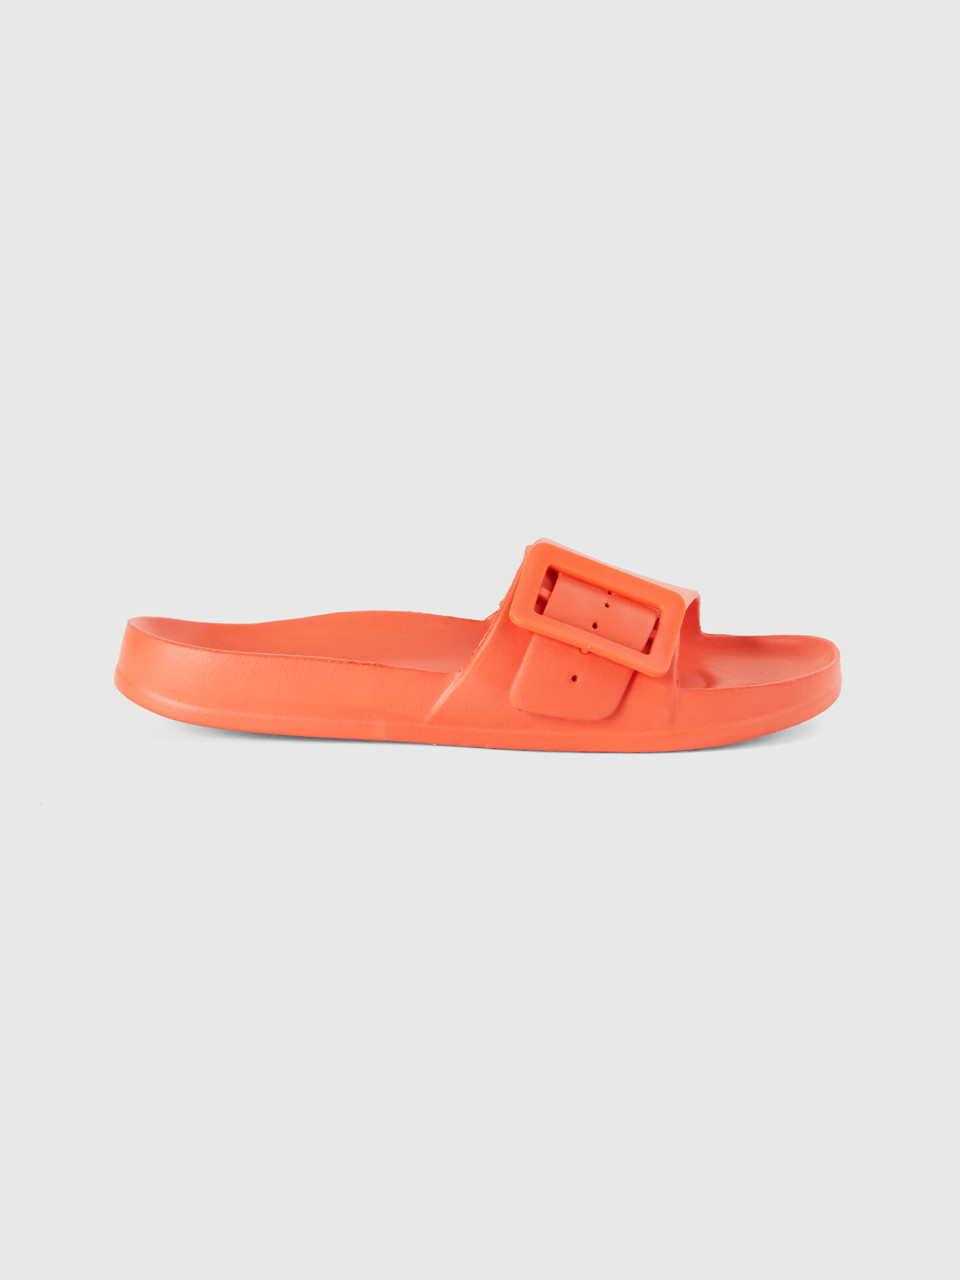 Benetton, Sandals With Band And Buckle,5, 